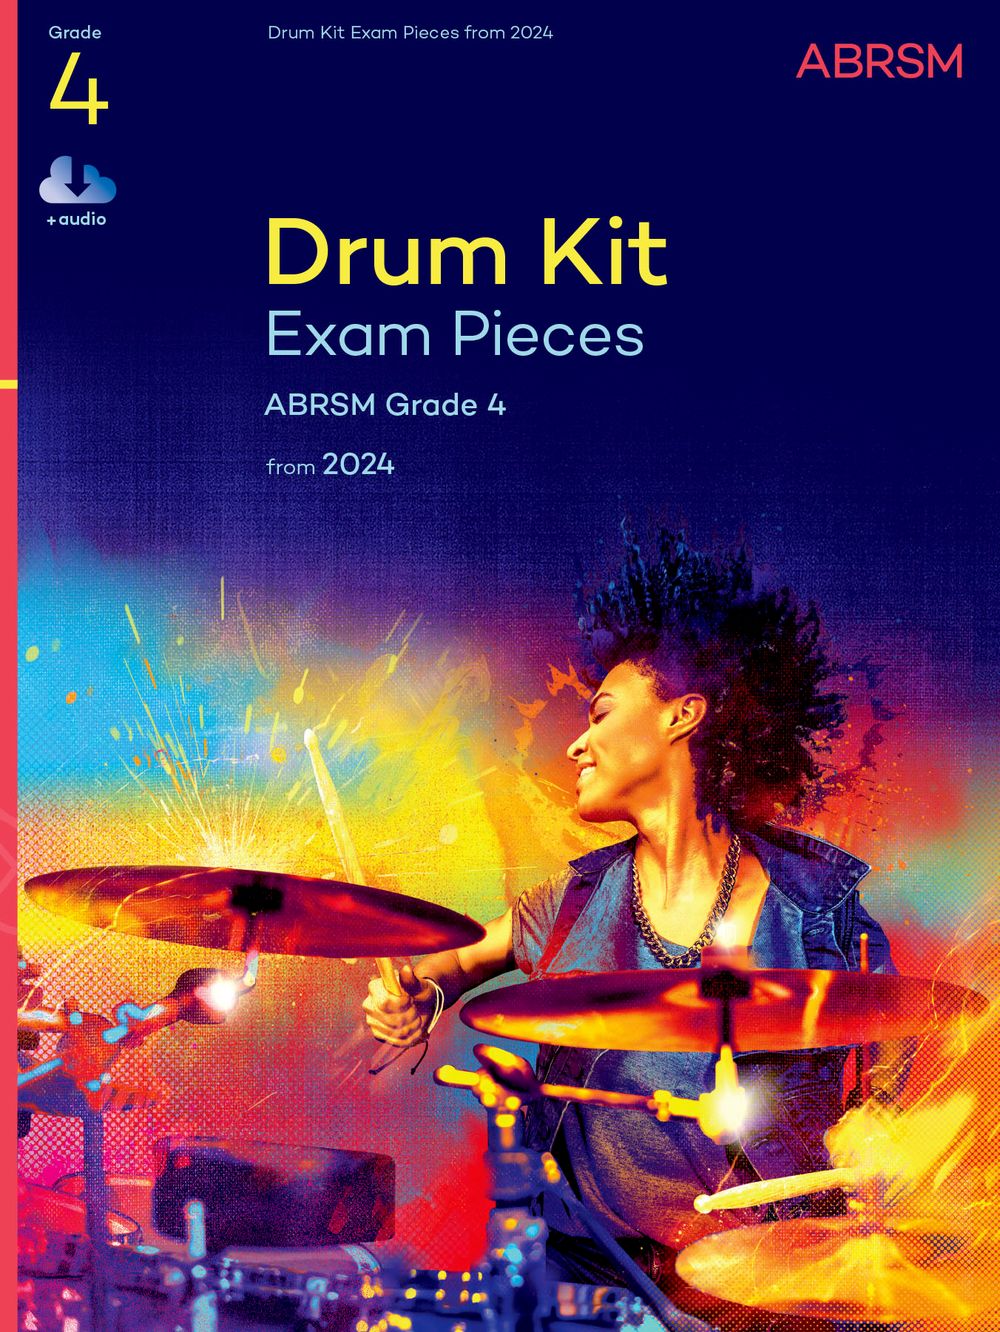 Drum Kit Exam Pieces From 2024 Grade 4 Abrsm Sheet Music Songbook